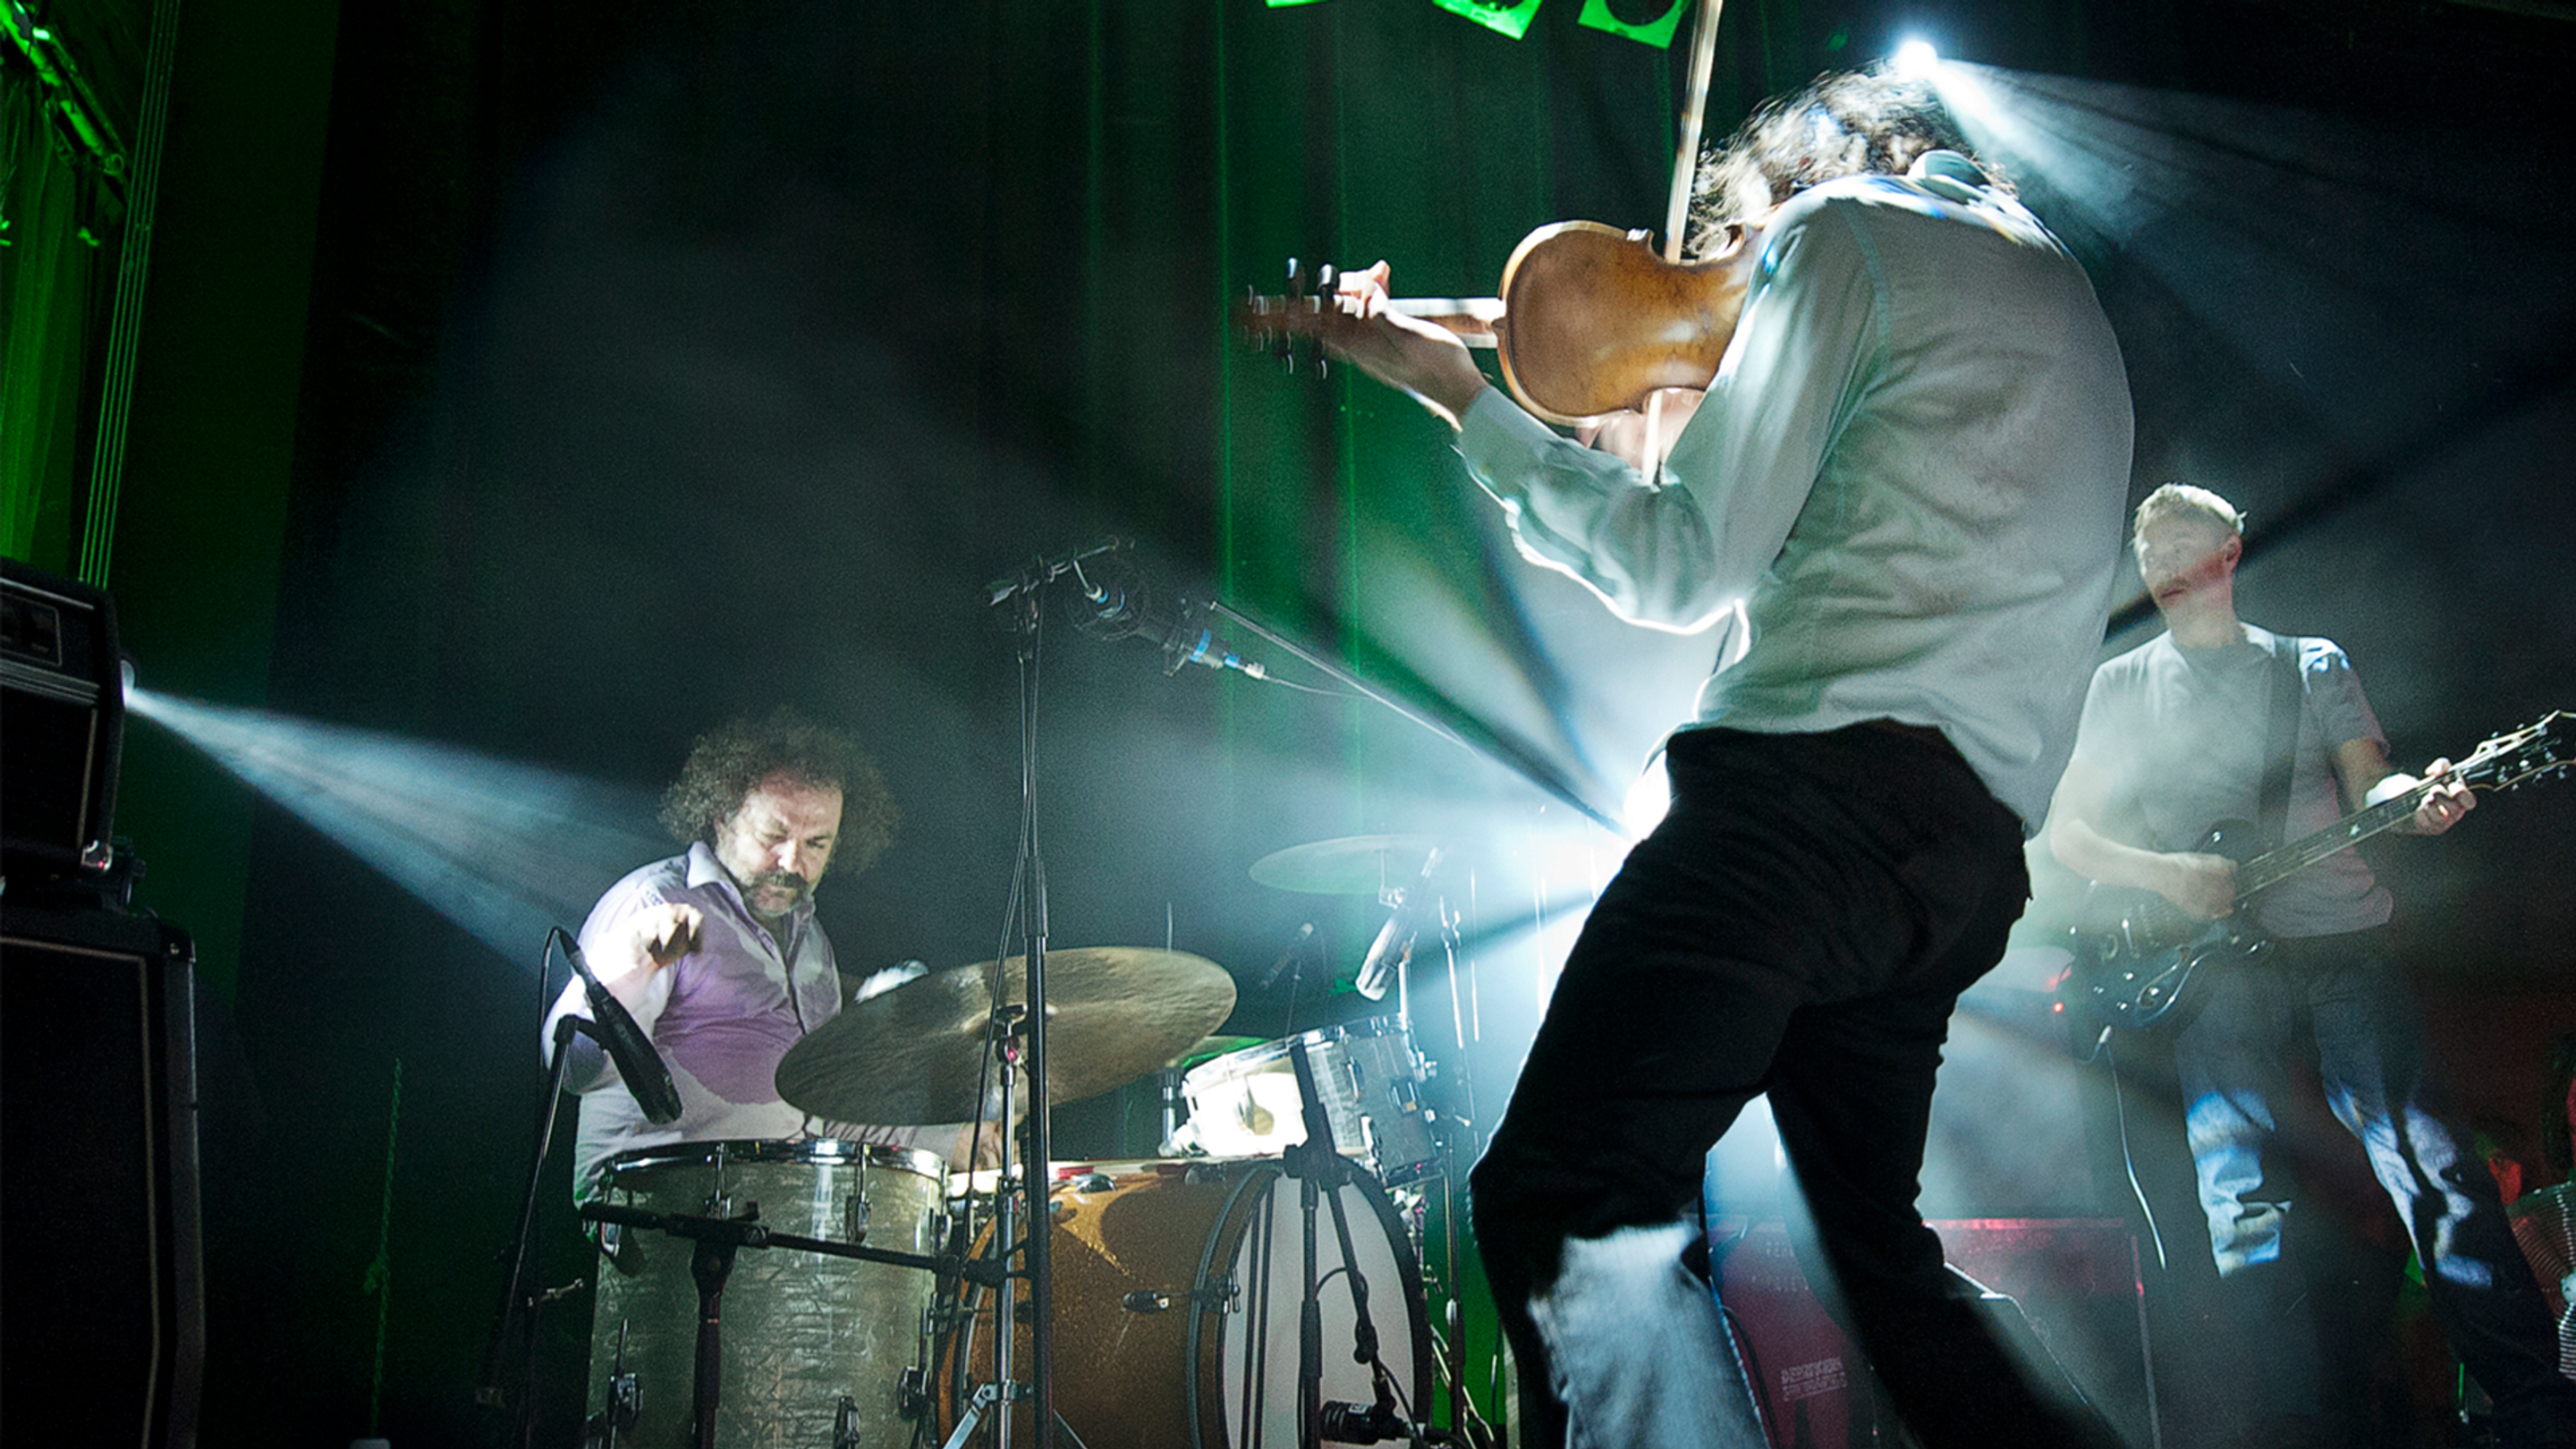 A dynamic live music scene with a violinist in motion, a drummer, and a bassist performing on stage under bright lights, capturing a moment of artistic expression.